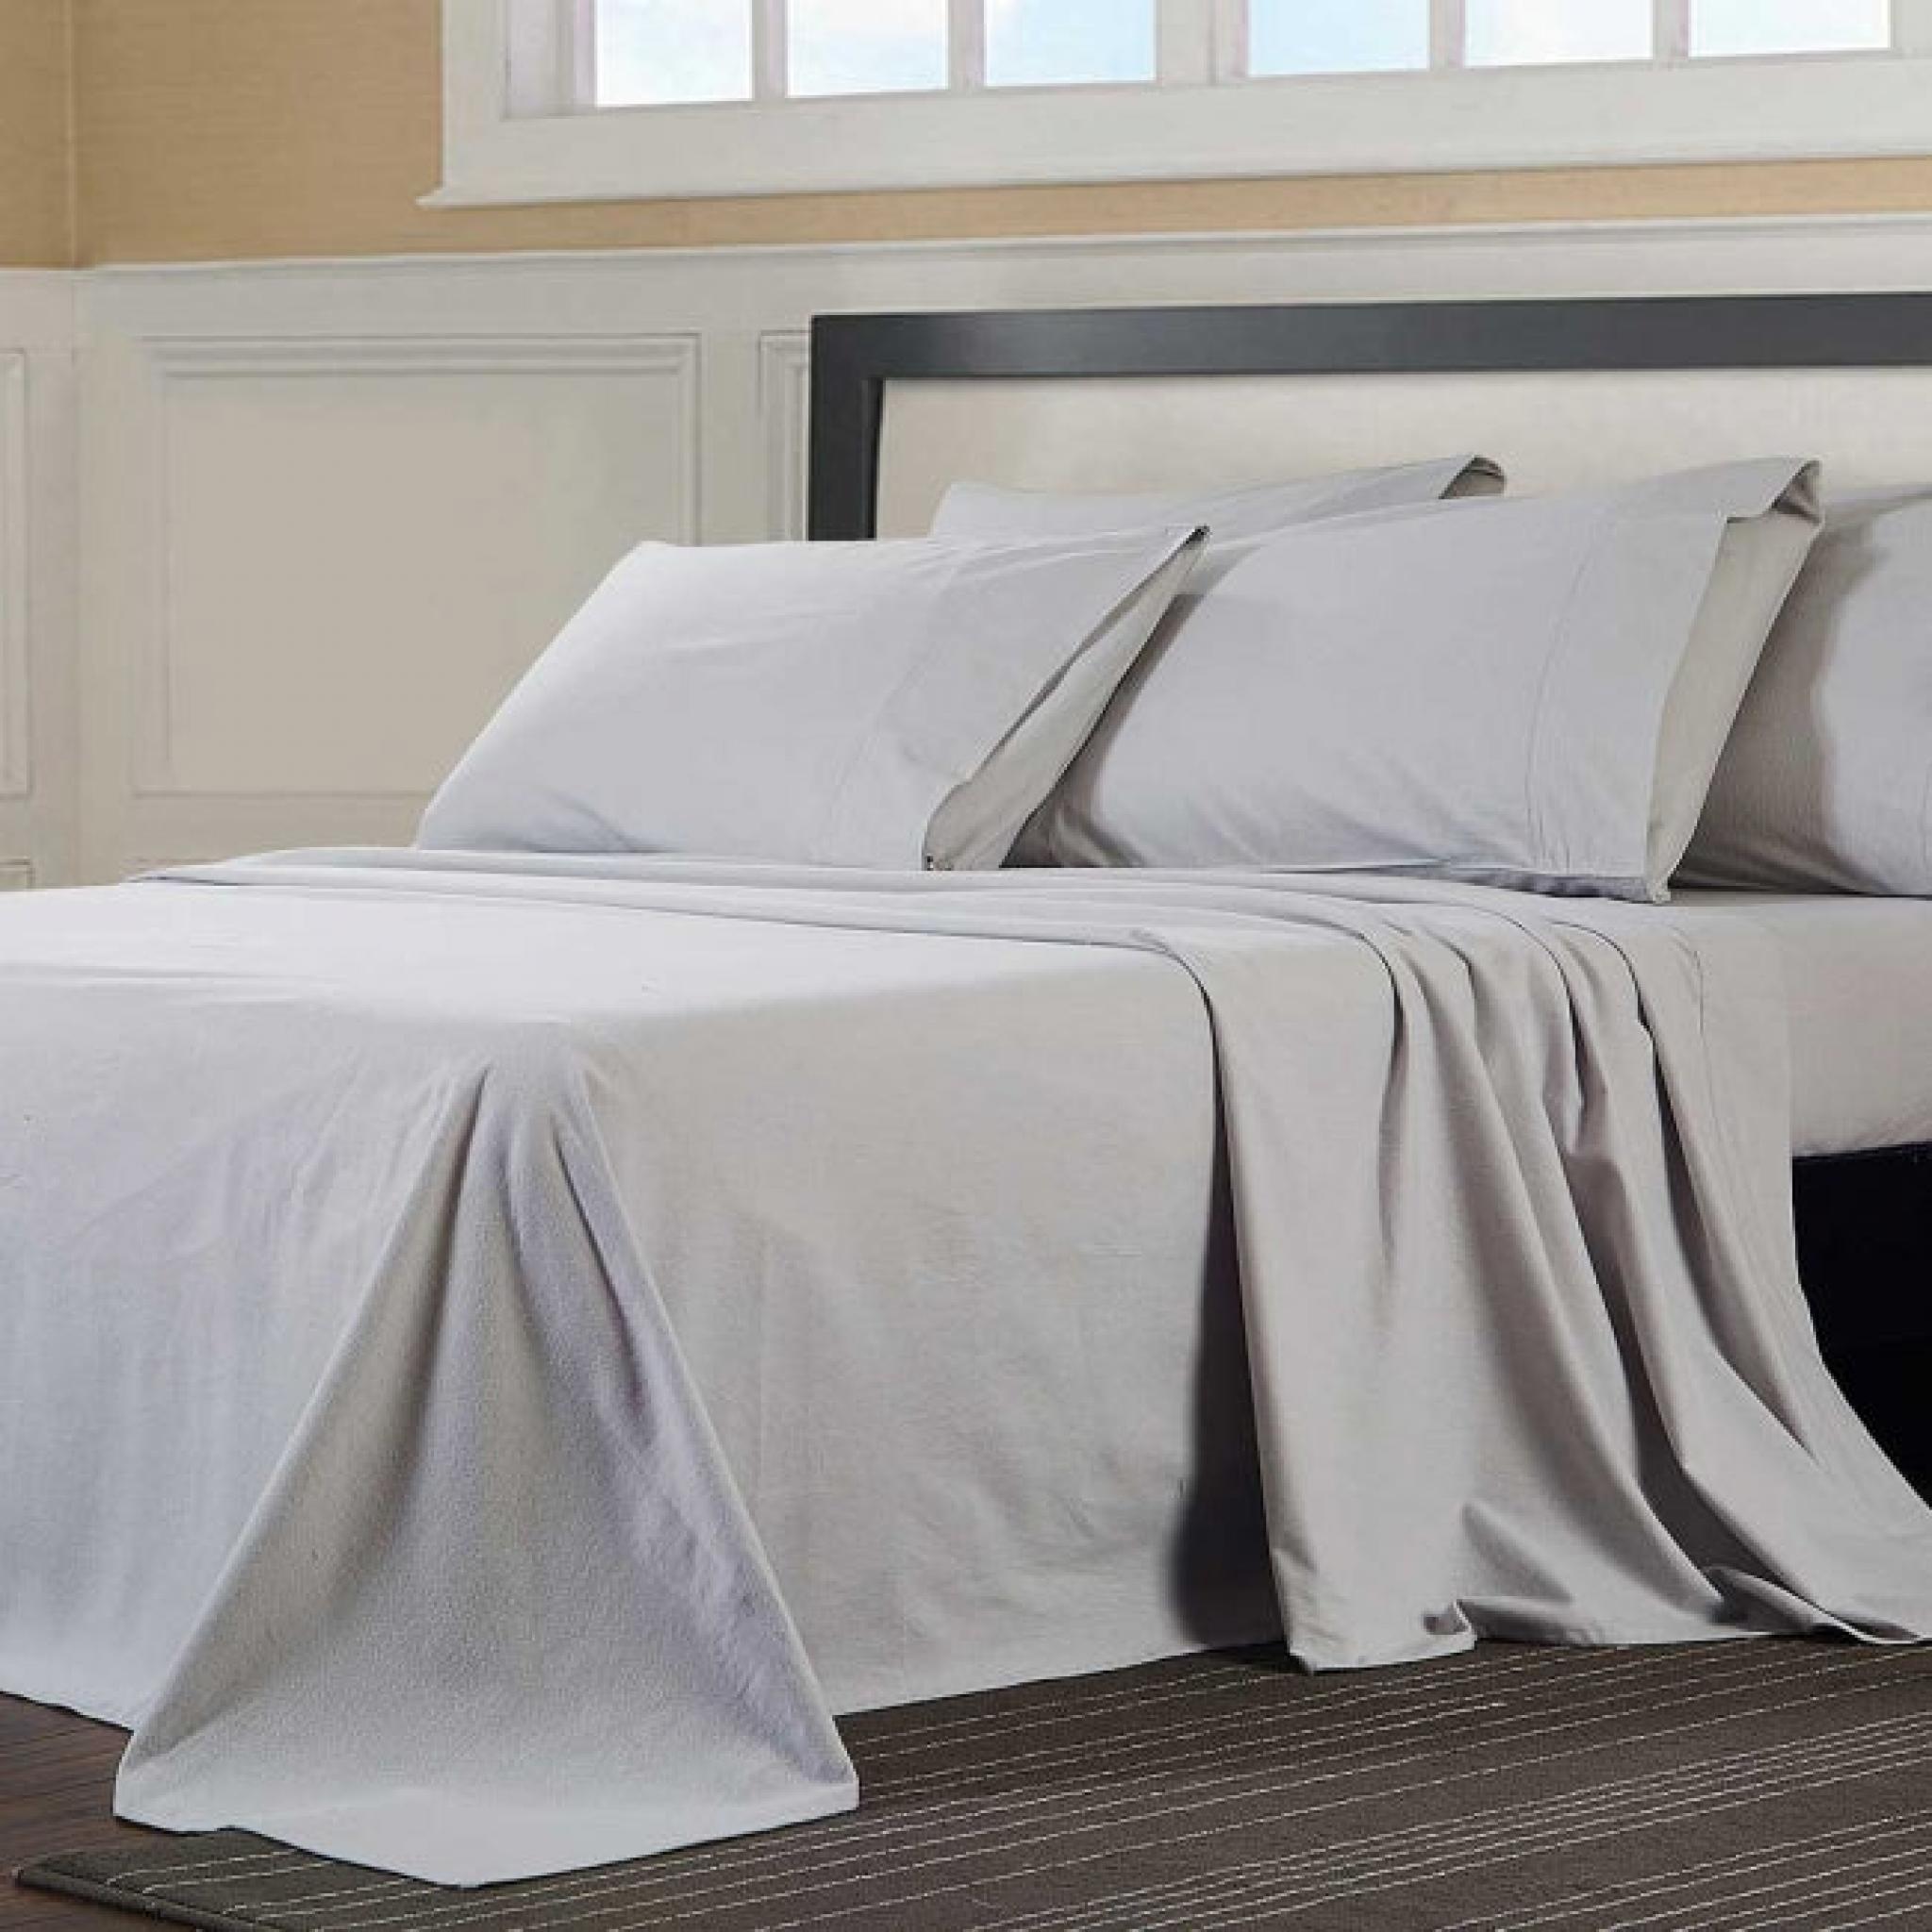 FLANNELETTE 100% BRUSHED COTTON  2'6" X 6'6" ELECTRIC BED FITTED SHEET 14 SIZES 